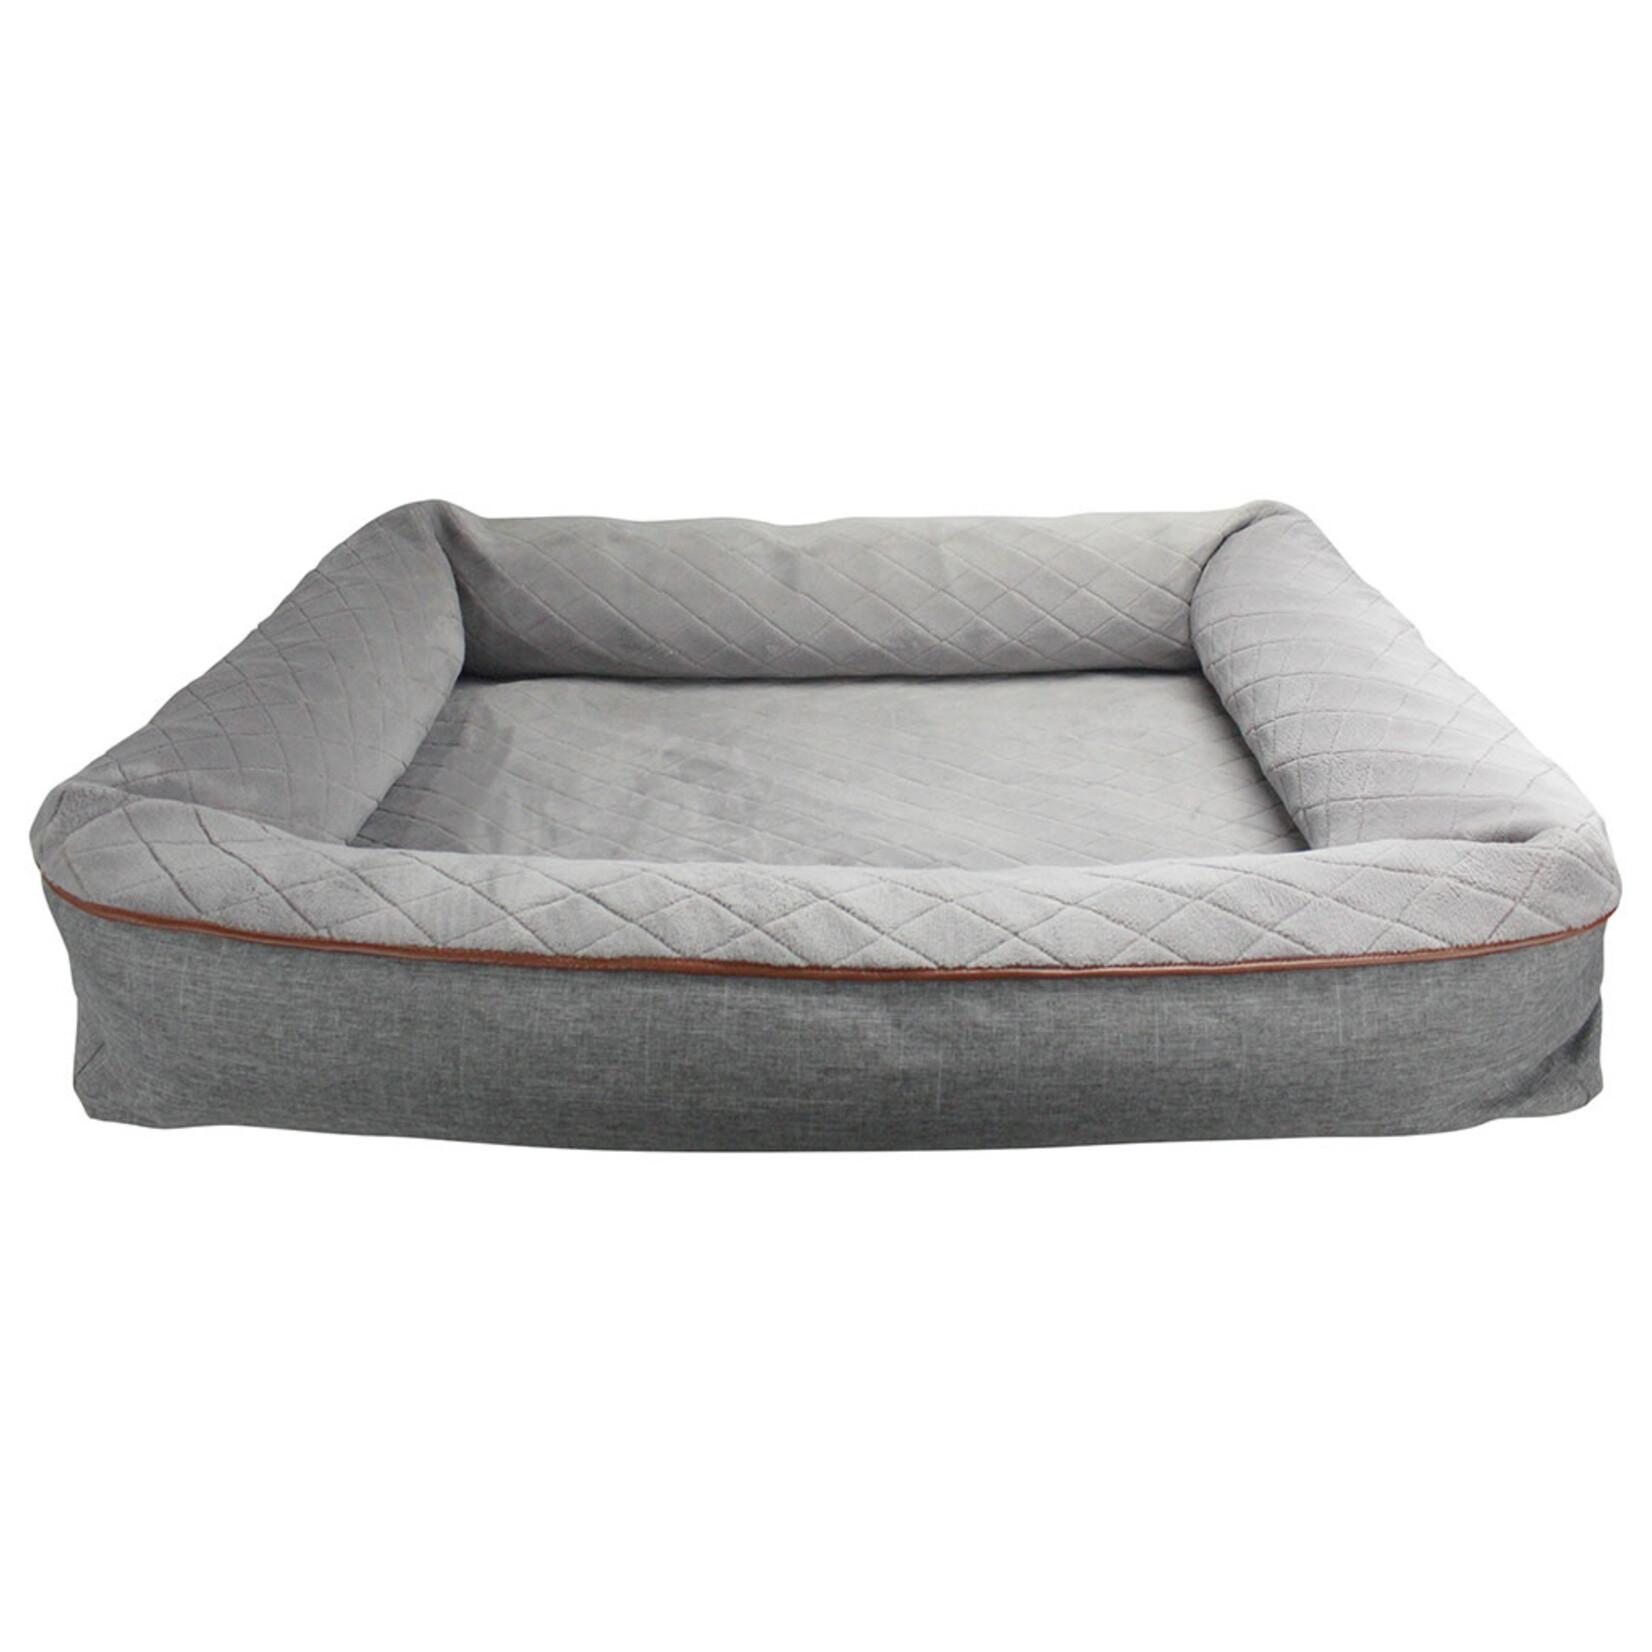 BE ONE BREED BE ONE BREED Snuggle Bed Gray Medium/Large 32x40